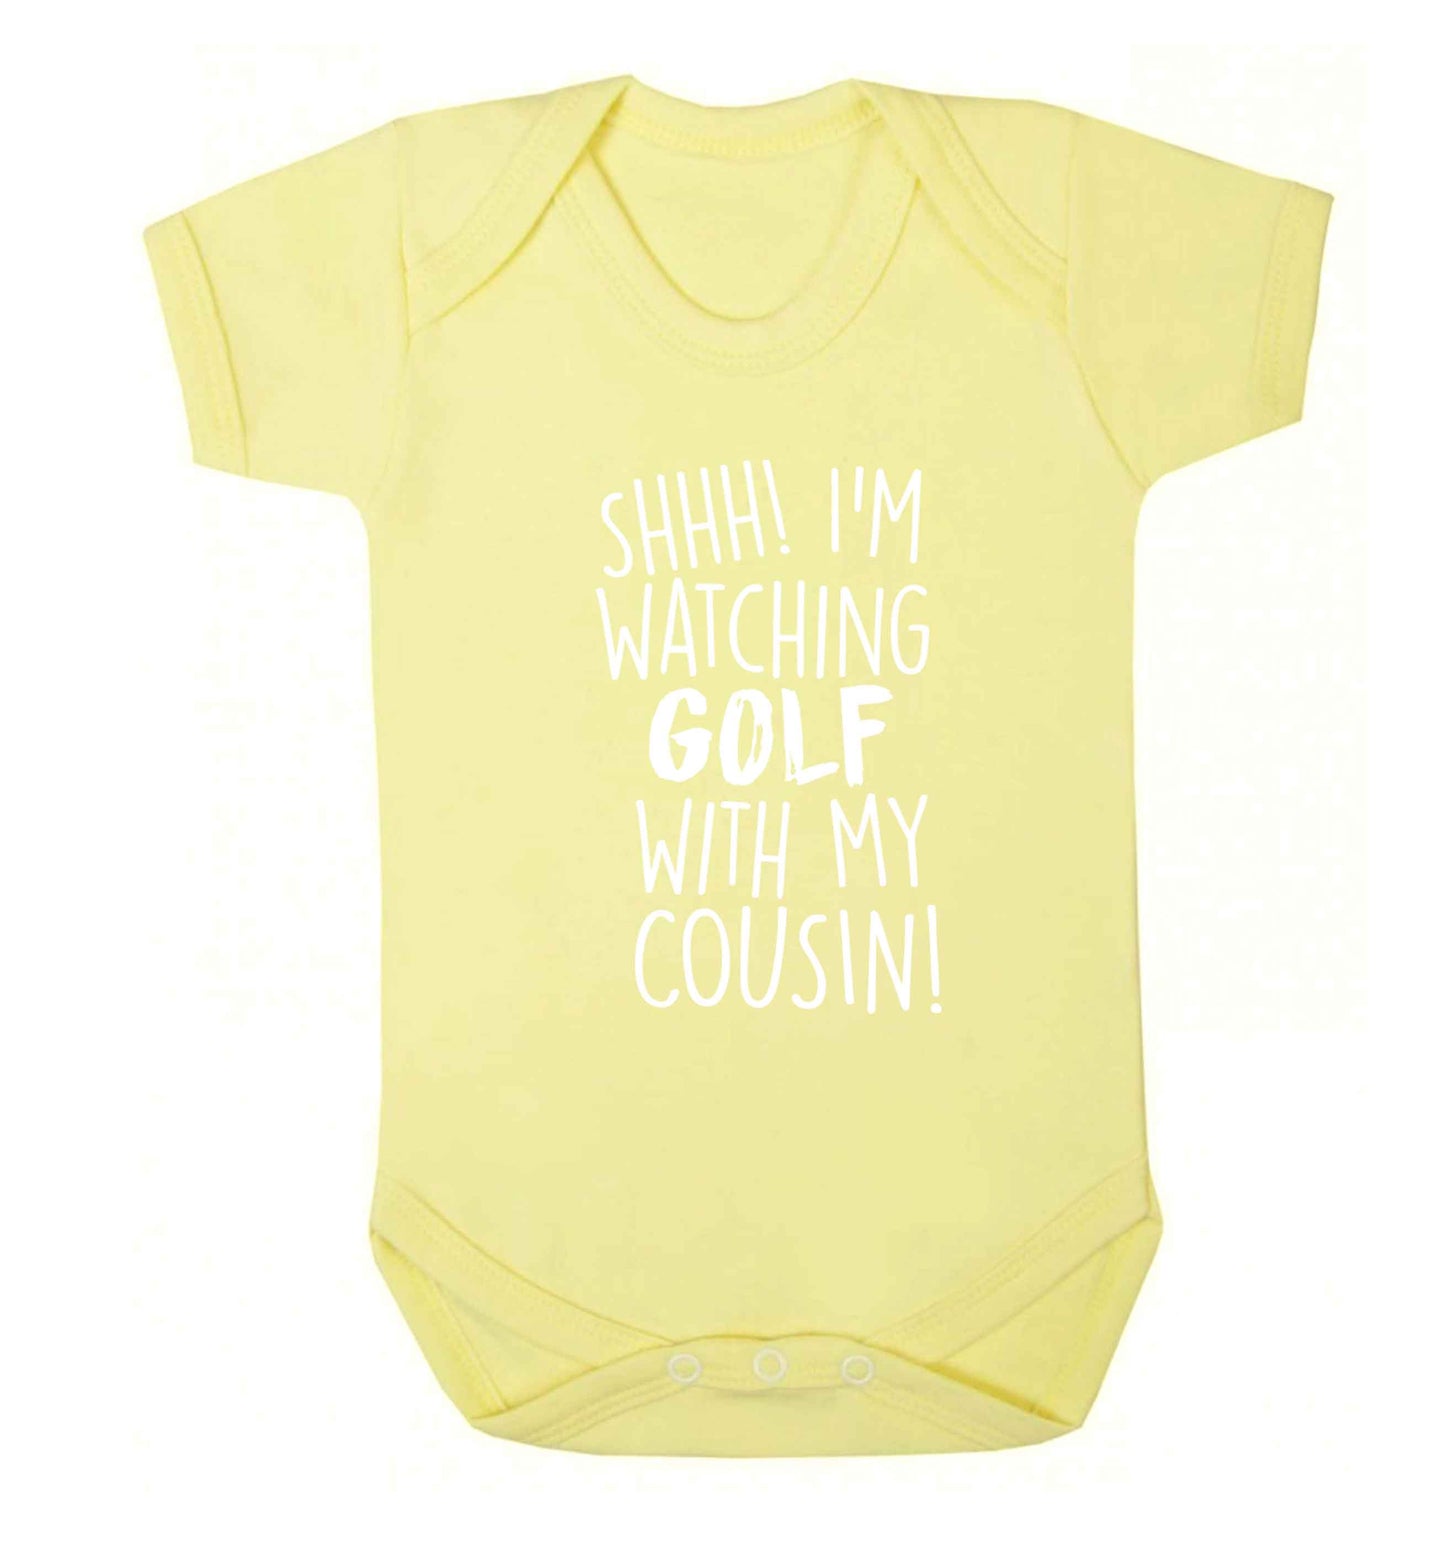 Shh I'm watching golf with my cousin Baby Vest pale yellow 18-24 months